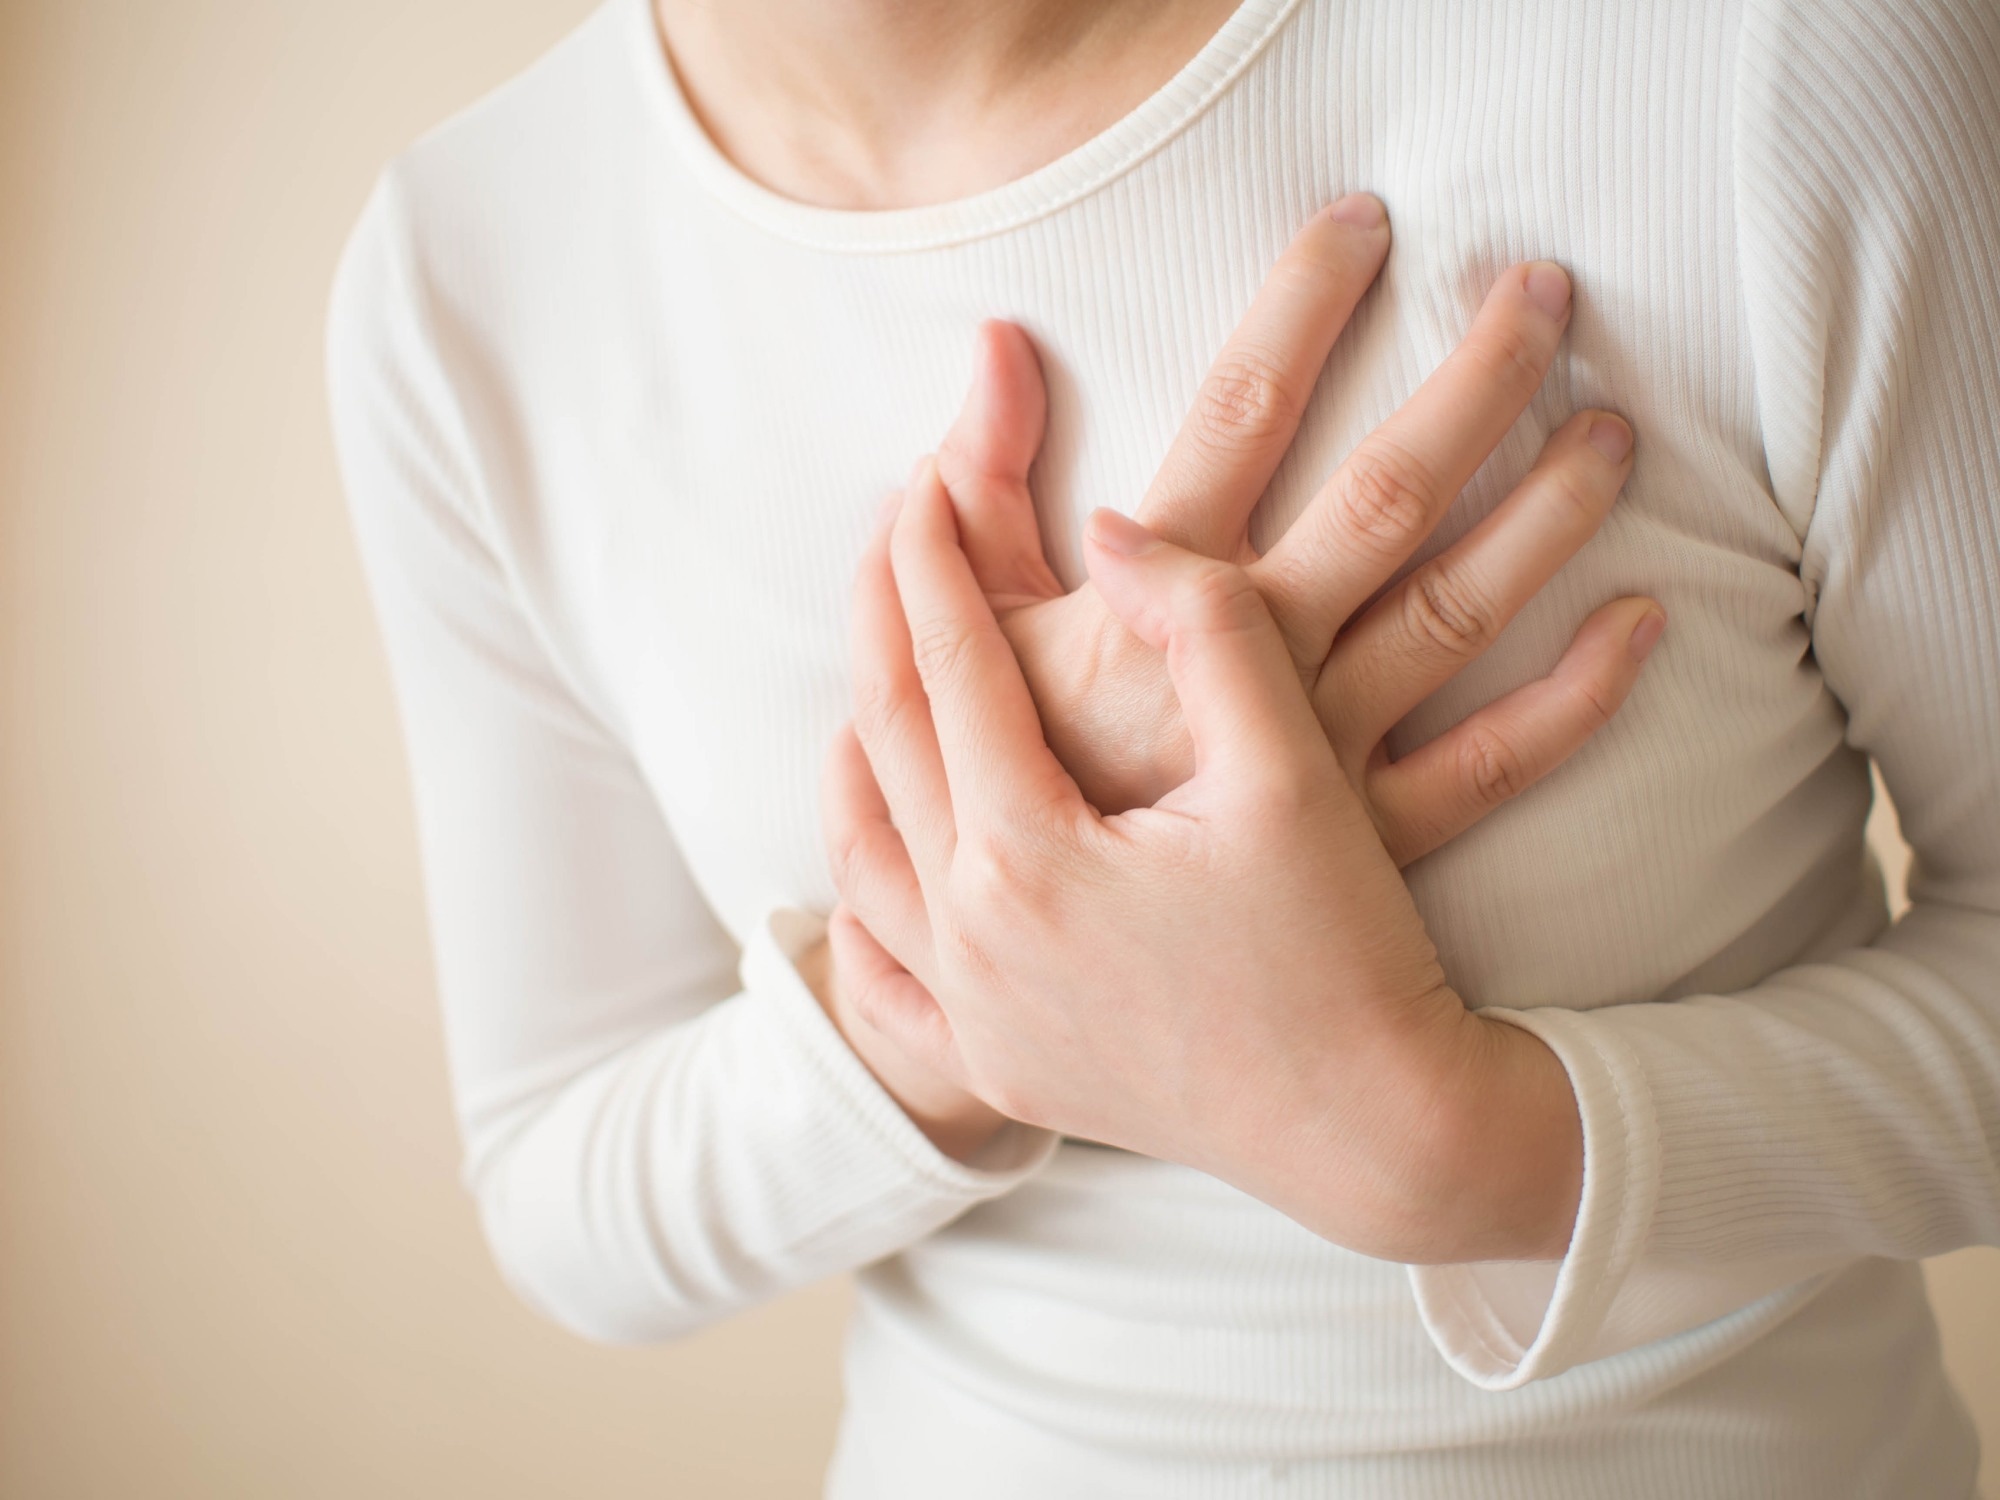 Study: Temporal trends in lifetime risks of atrial fibrillation and its complications between 2000 and 2022: Danish, nationwide, population based cohort study. Image Credit: Orawan Pattarawimonchai/Shutterstock.com